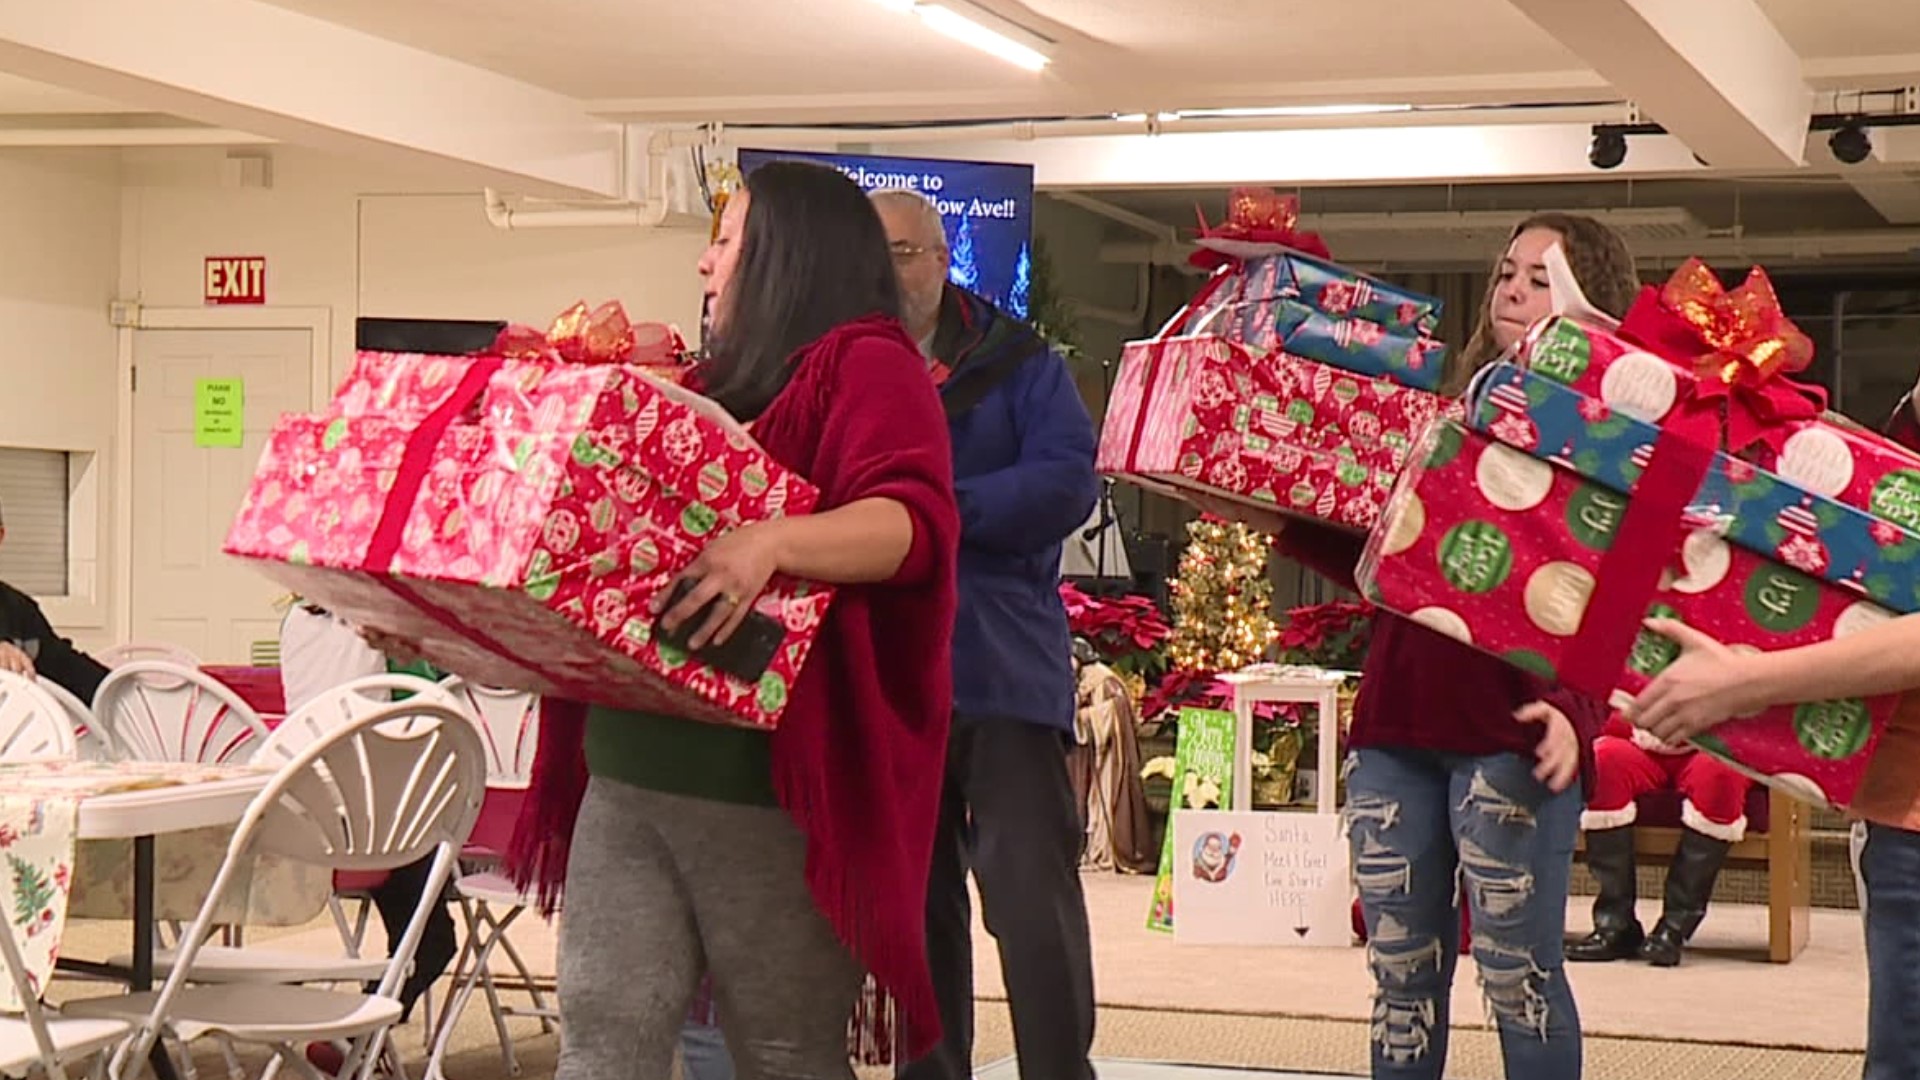 Families were nominated by members of the community, then received gifts and other goodies.